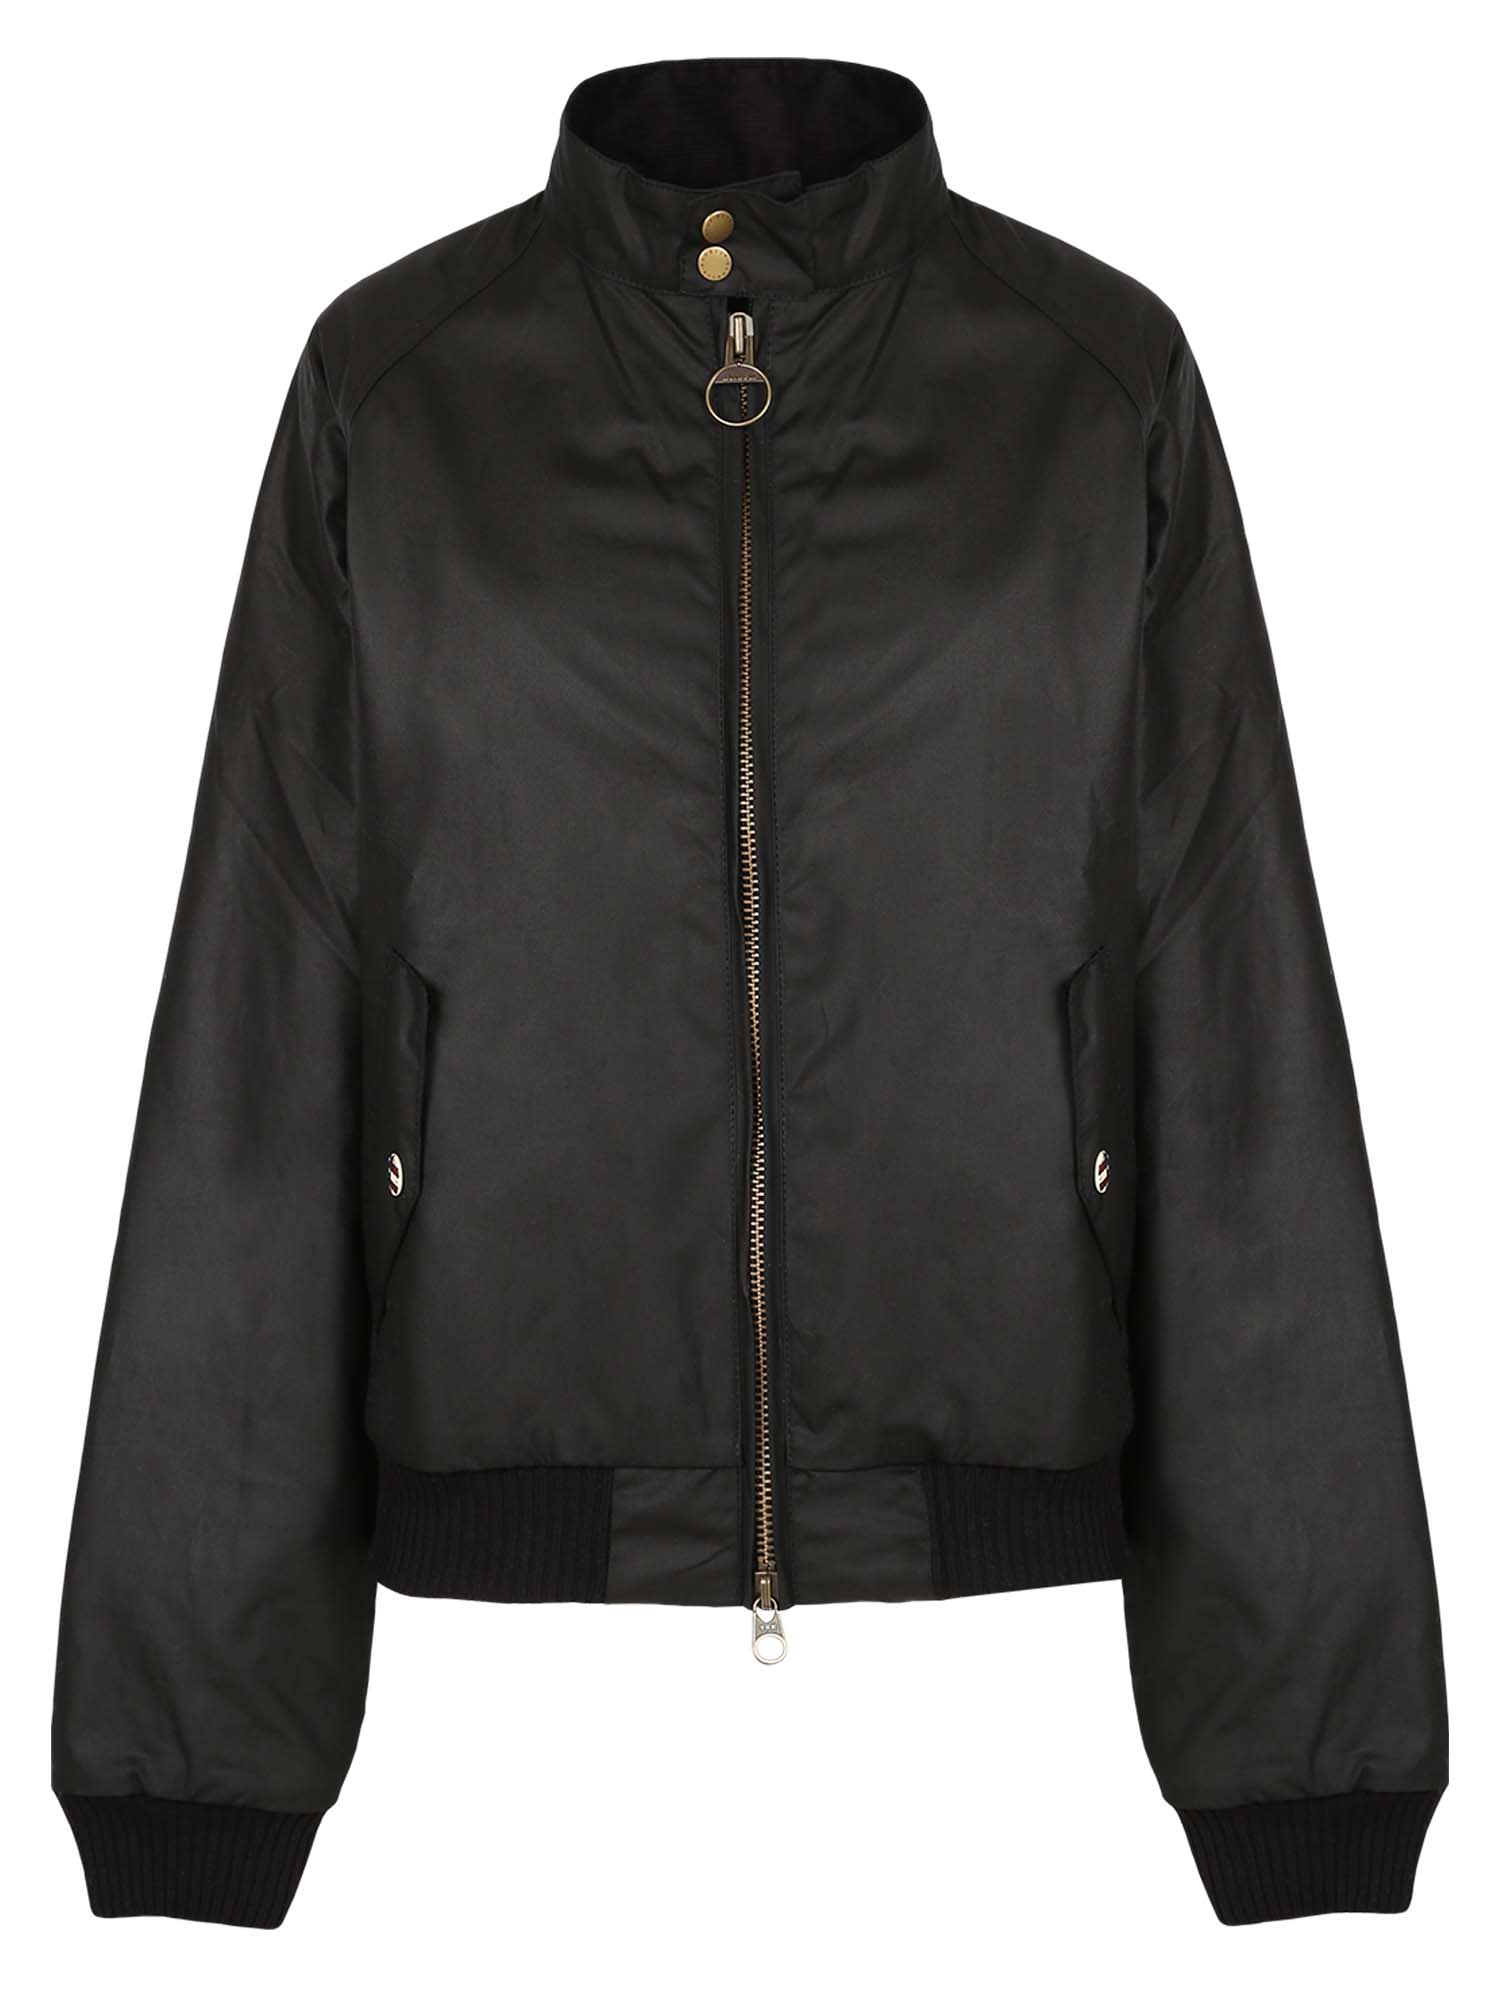 Barbour Zipped Jacket